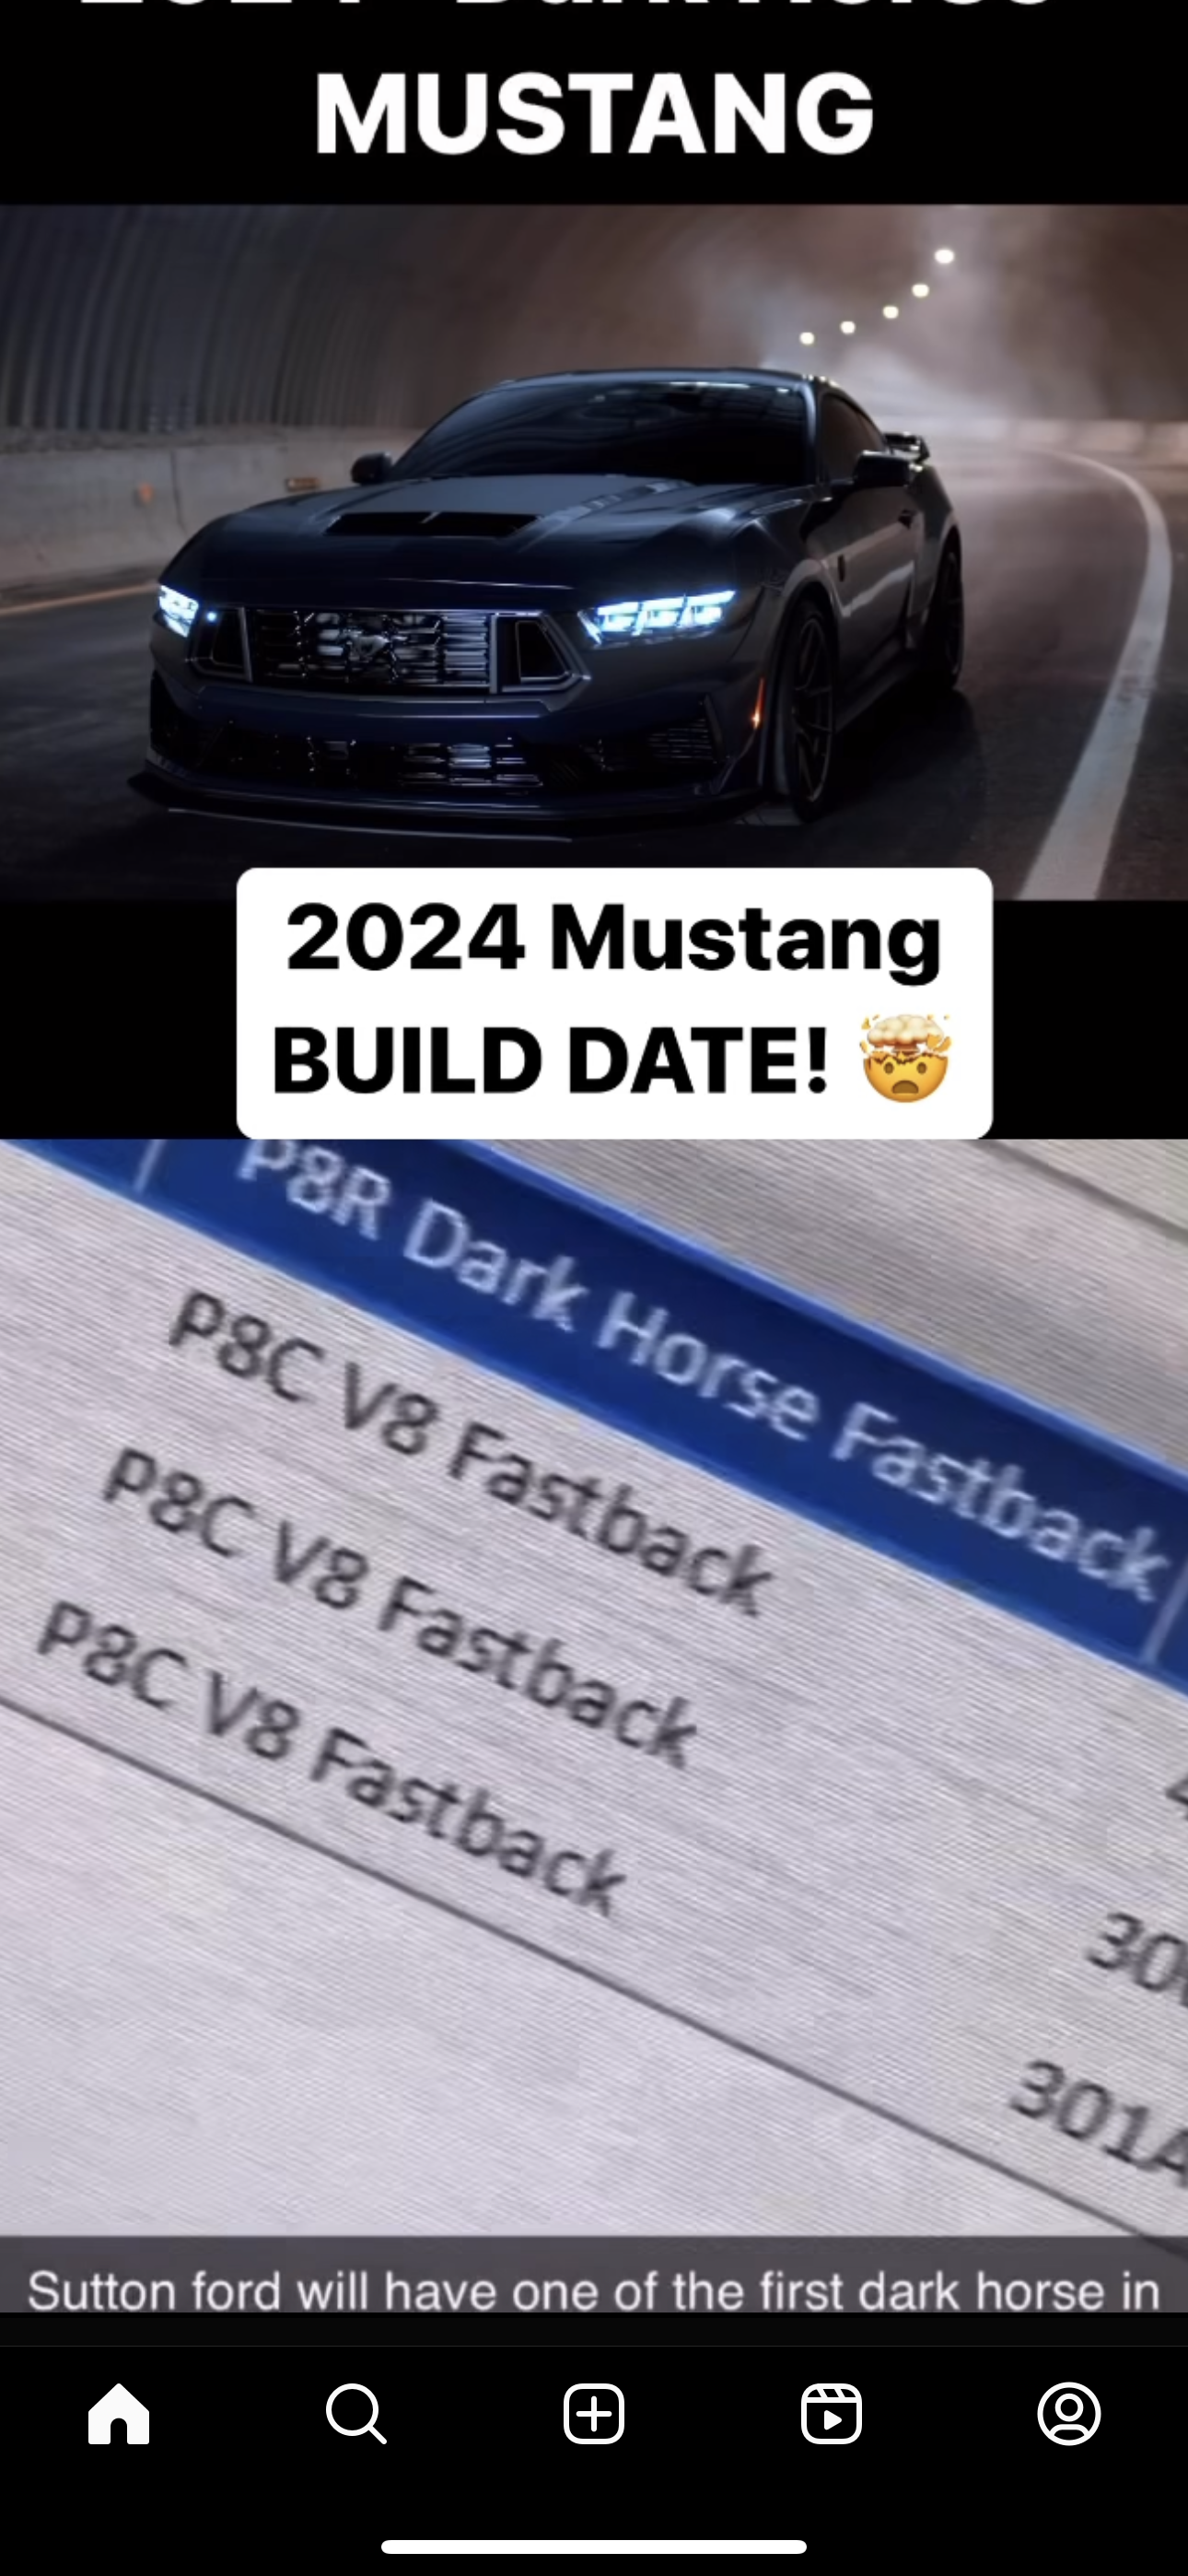 S650 Mustang Start of 2024MY Mustang production is 4/11/23. Order banks open 1/14/23. Scheduling begins 3/11/23 (per Donlan and Element Fleet Forecasts) C6D7635B-7672-4EE0-A89B-A787CE0229AB